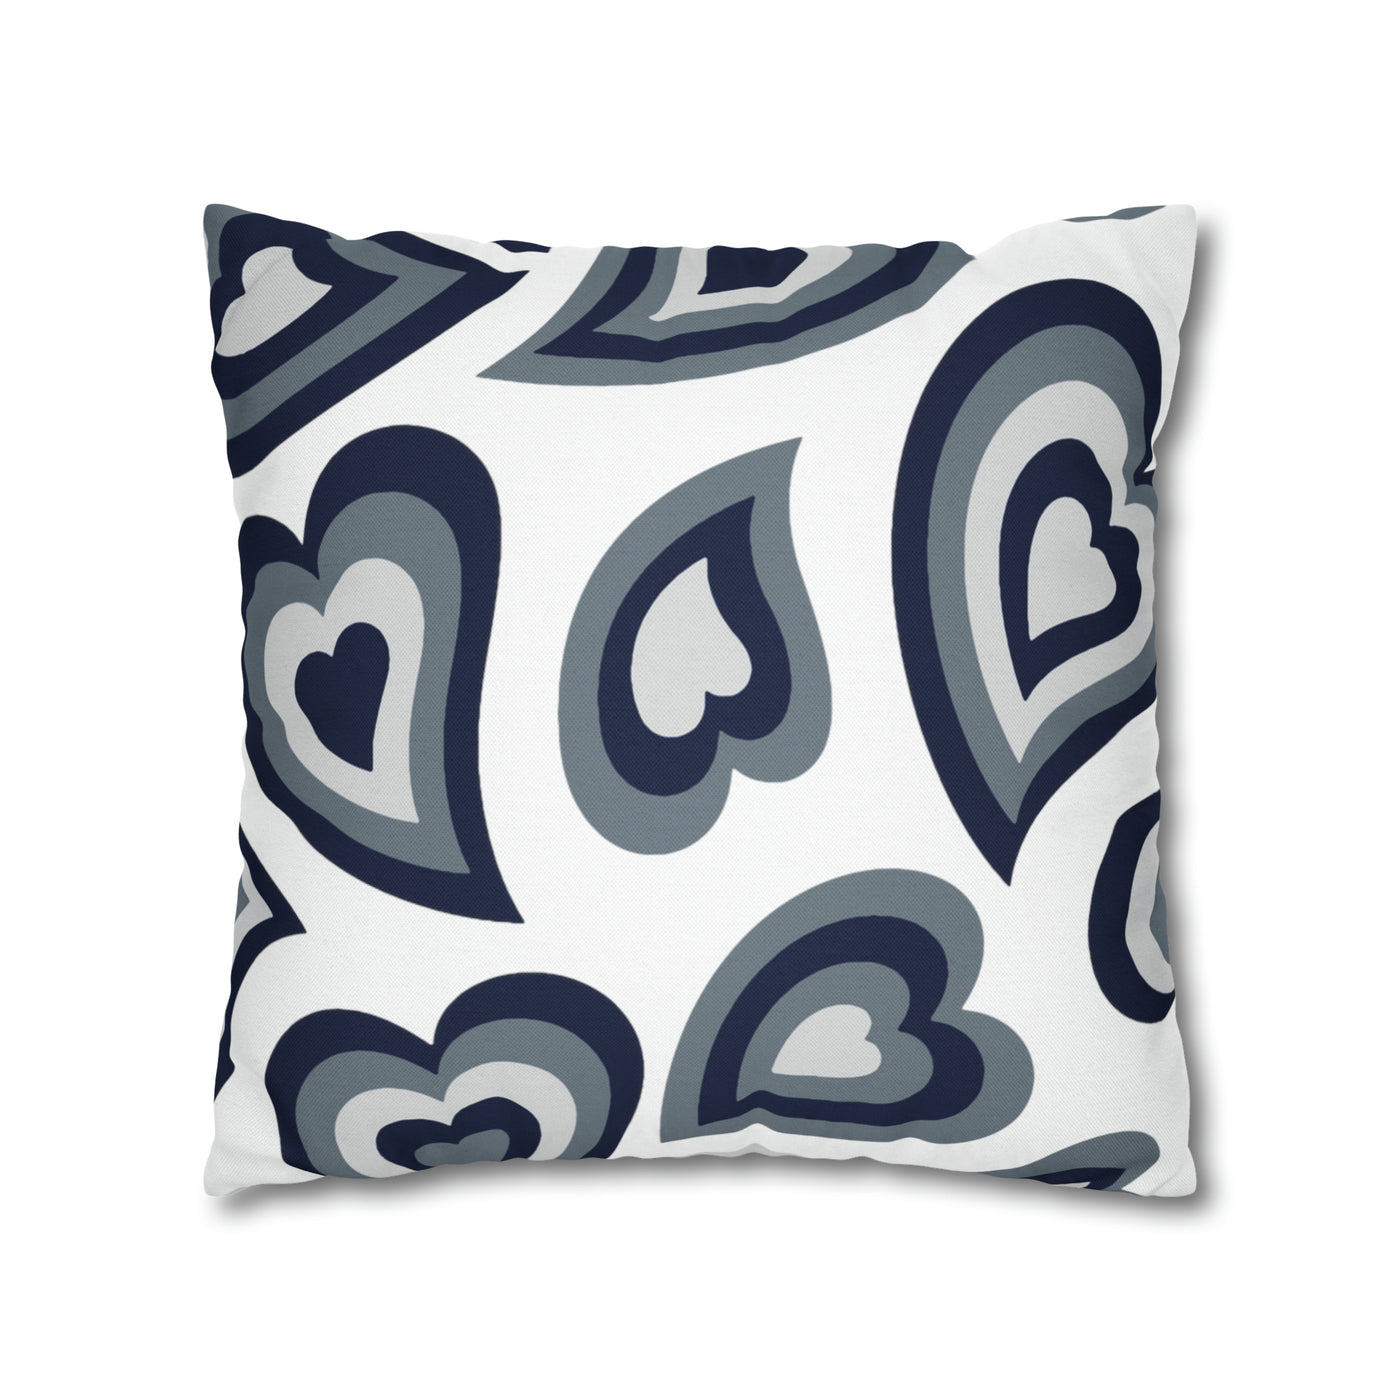 Retro Heart Pillow - Navy and Grey, Heart Pillow, Hearts, Valentine's Day, UConn Huskies, Playroom Decor, Bed Party Pillow, Dorm Pillow